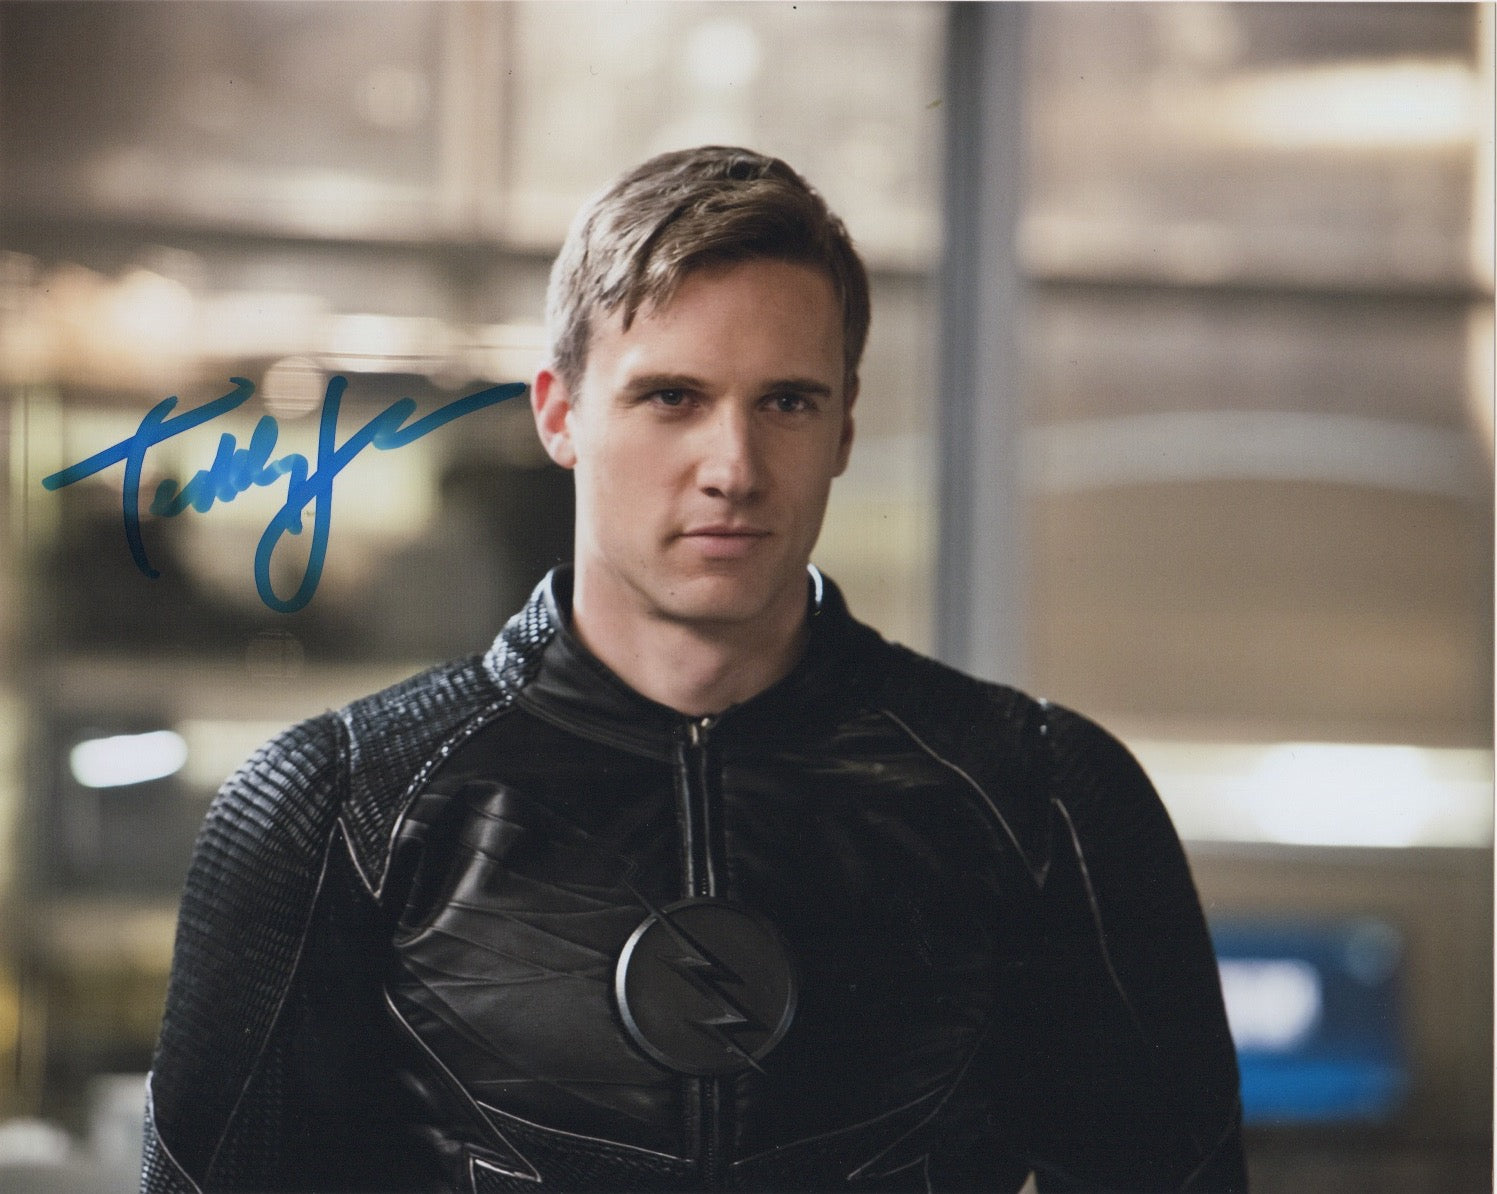 Teddy Sears The Flash Signed Autograph Zoom 8x10 Photo #6 - Outlaw Hobbies Authentic Autographs